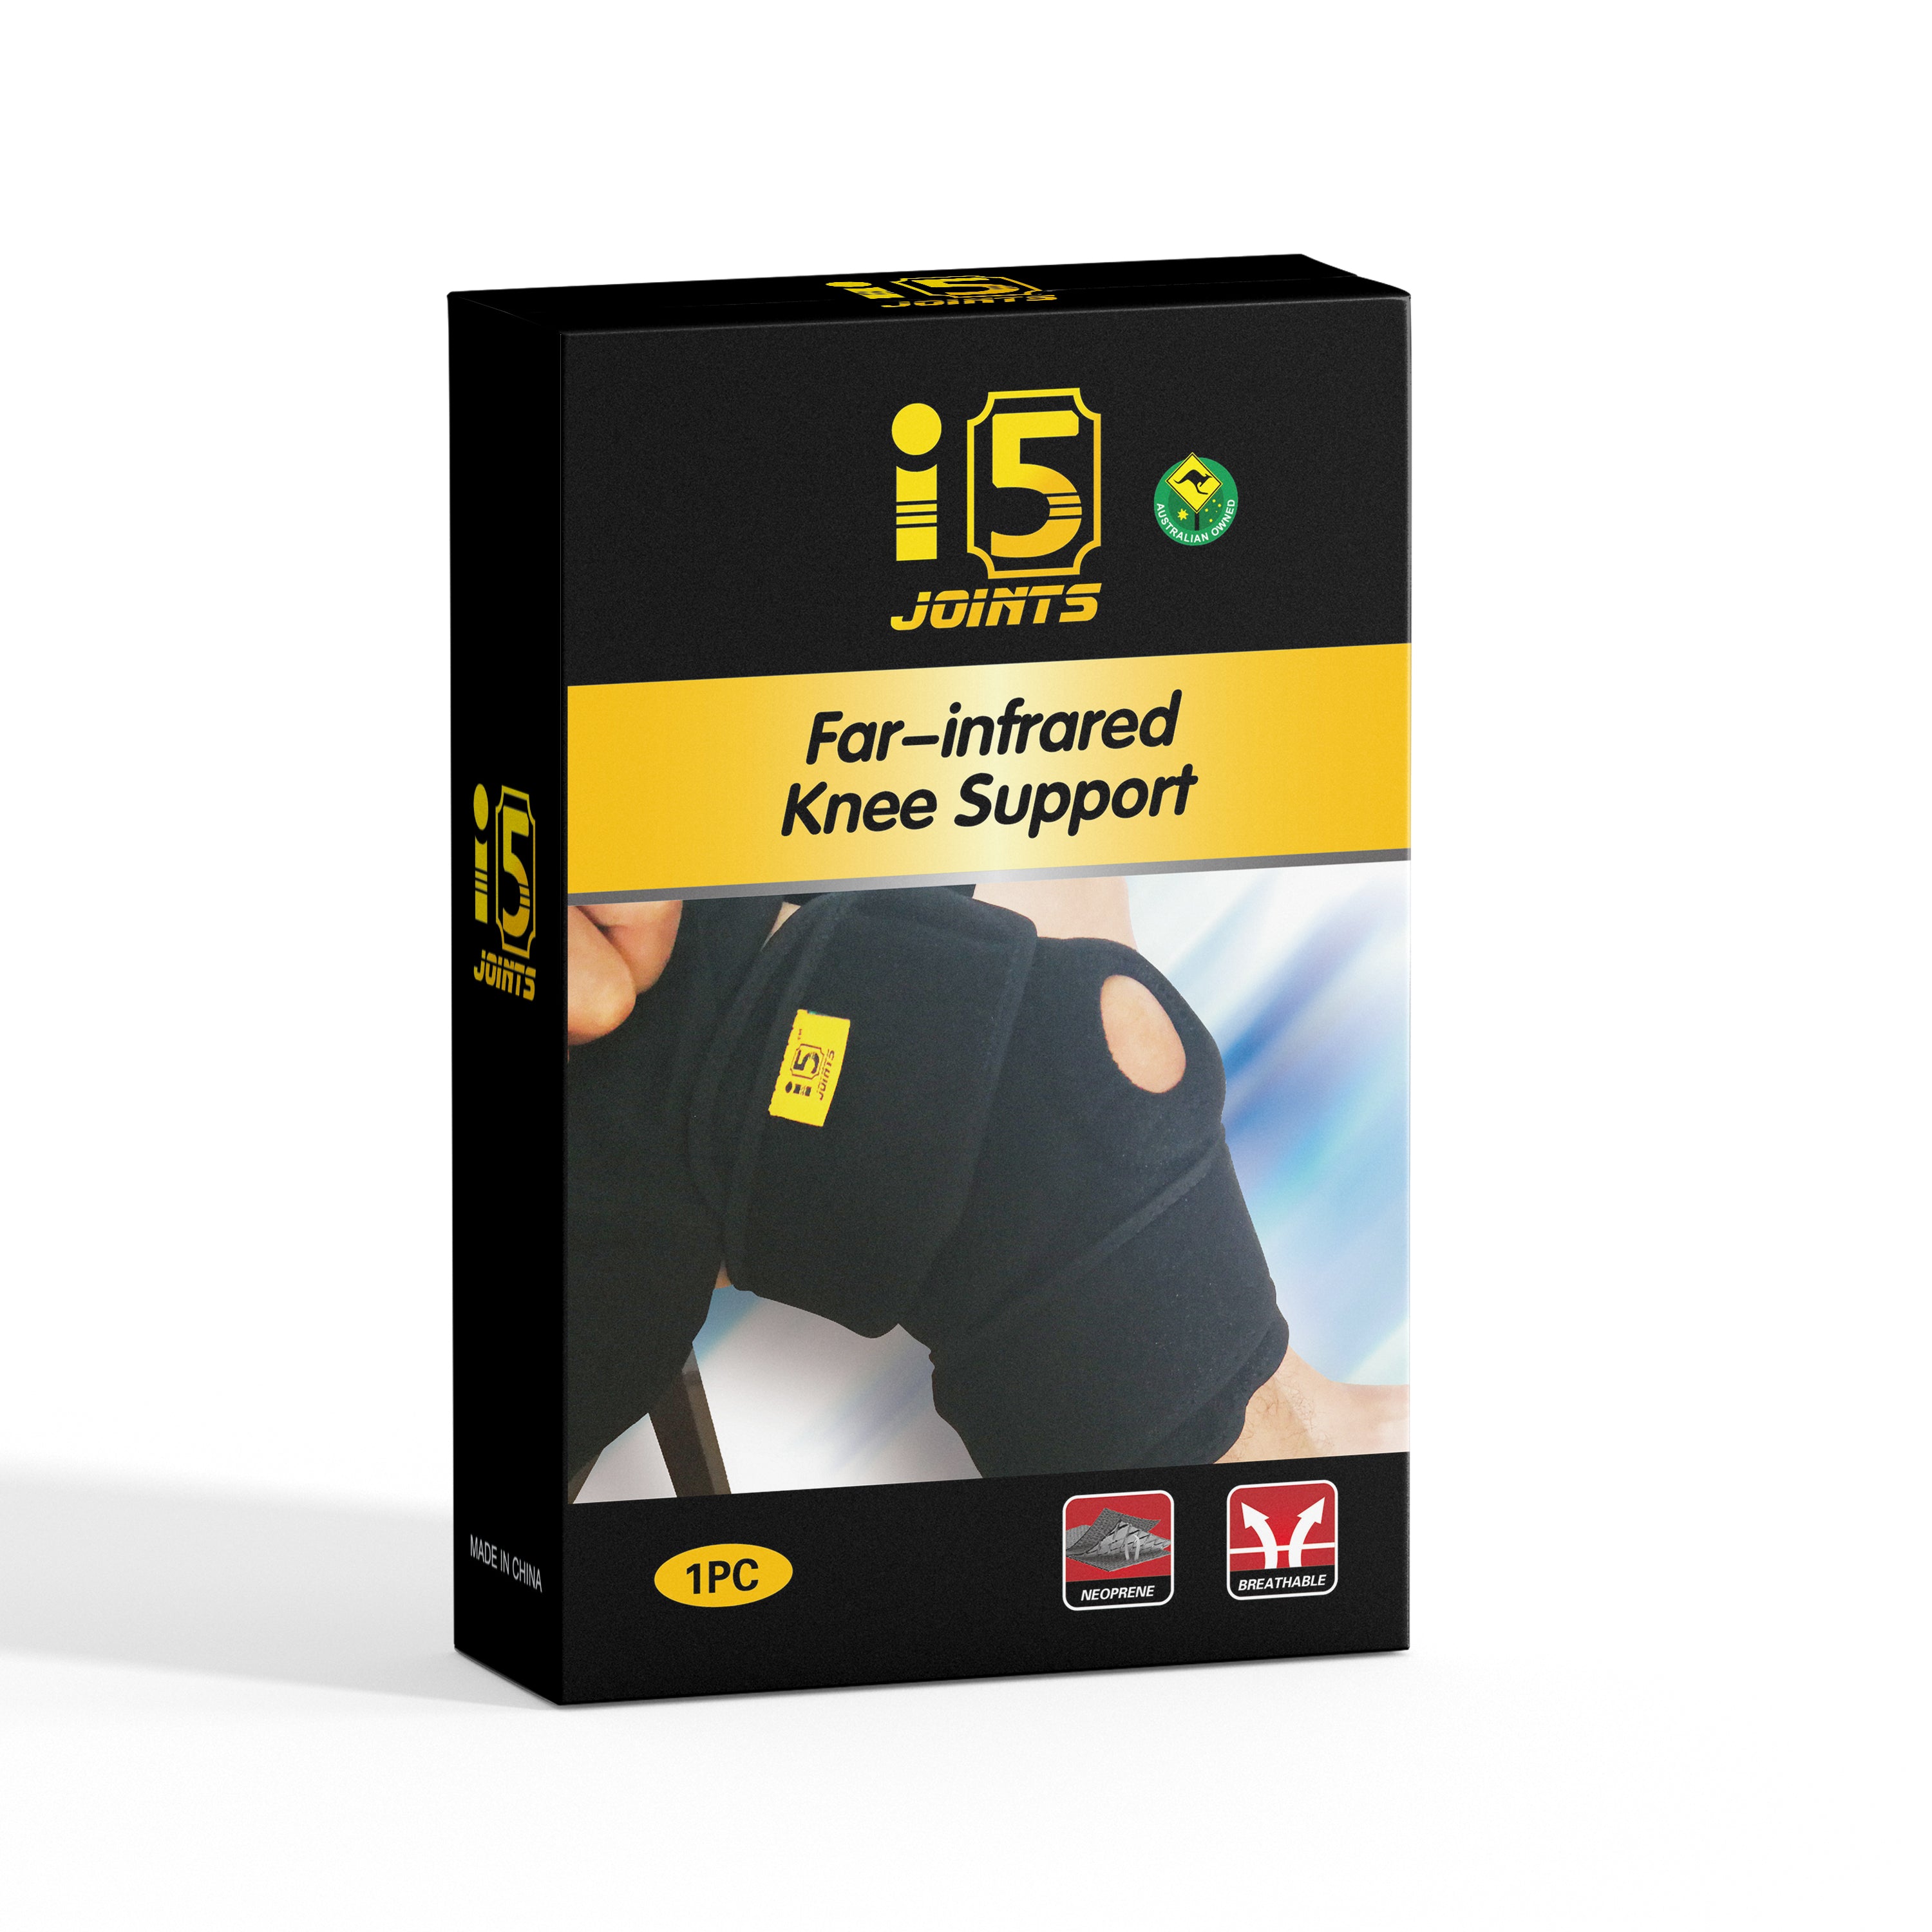 I5Joints-Far Infrared Knee Support(Premium Knee Support Open Patella, Breathable Knee Cap Brace for Arthritis, Pain Relief, Sports for Men & Women )